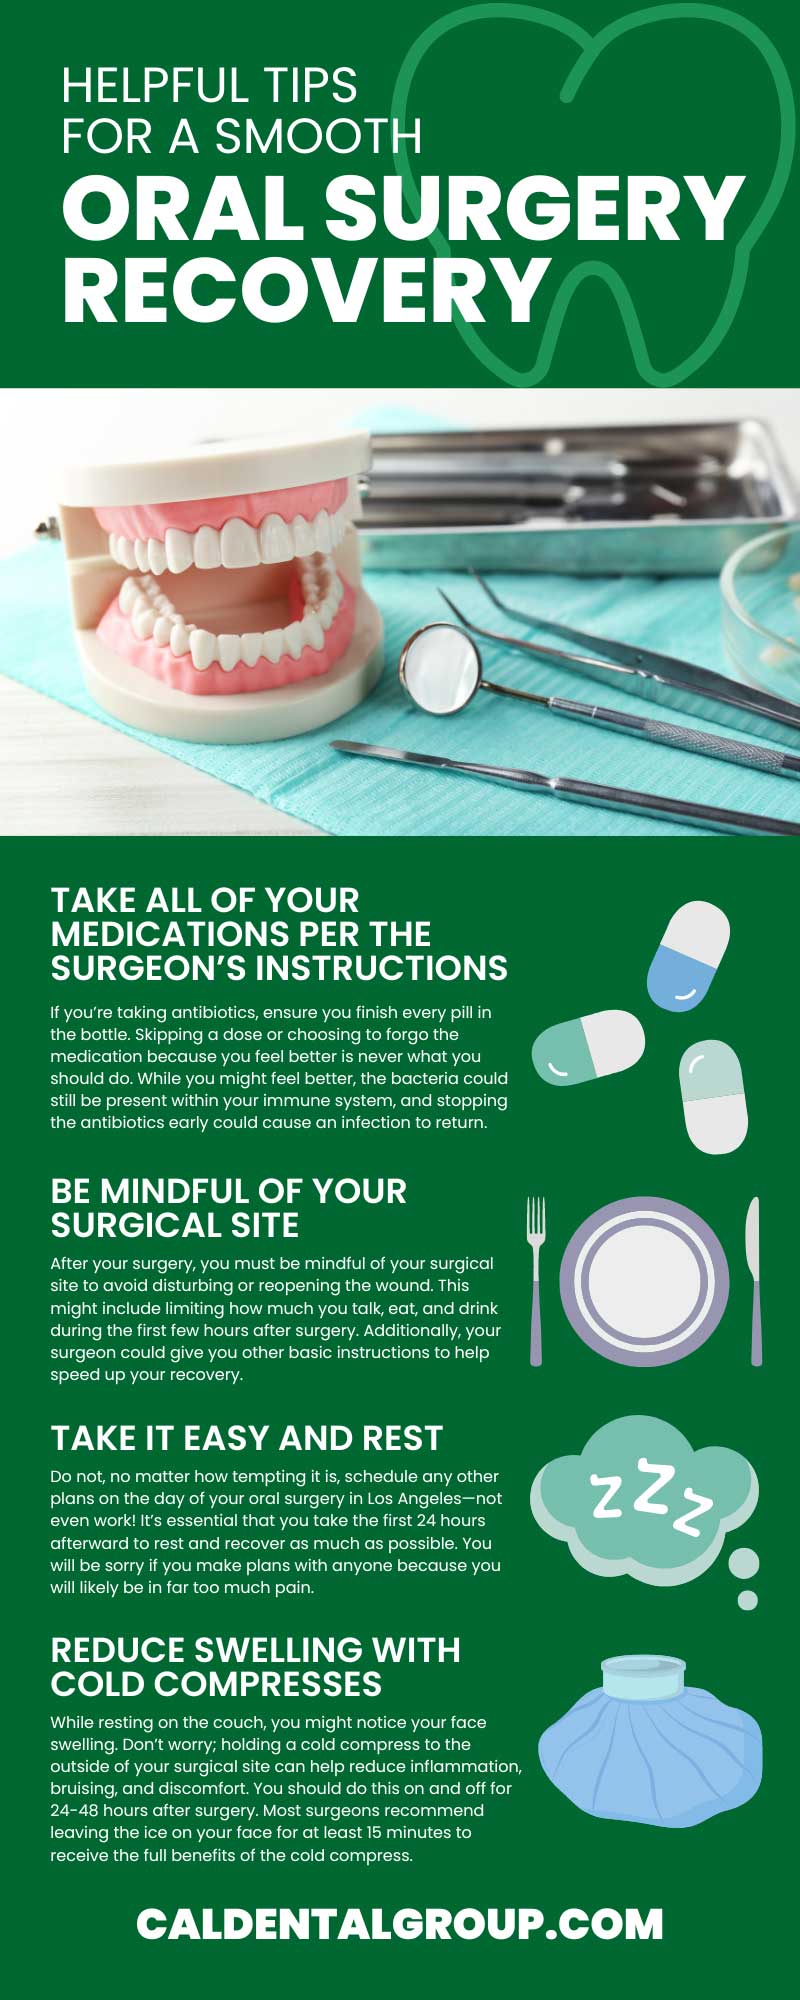 8 Helpful Tips for a Smooth Oral Surgery Recovery